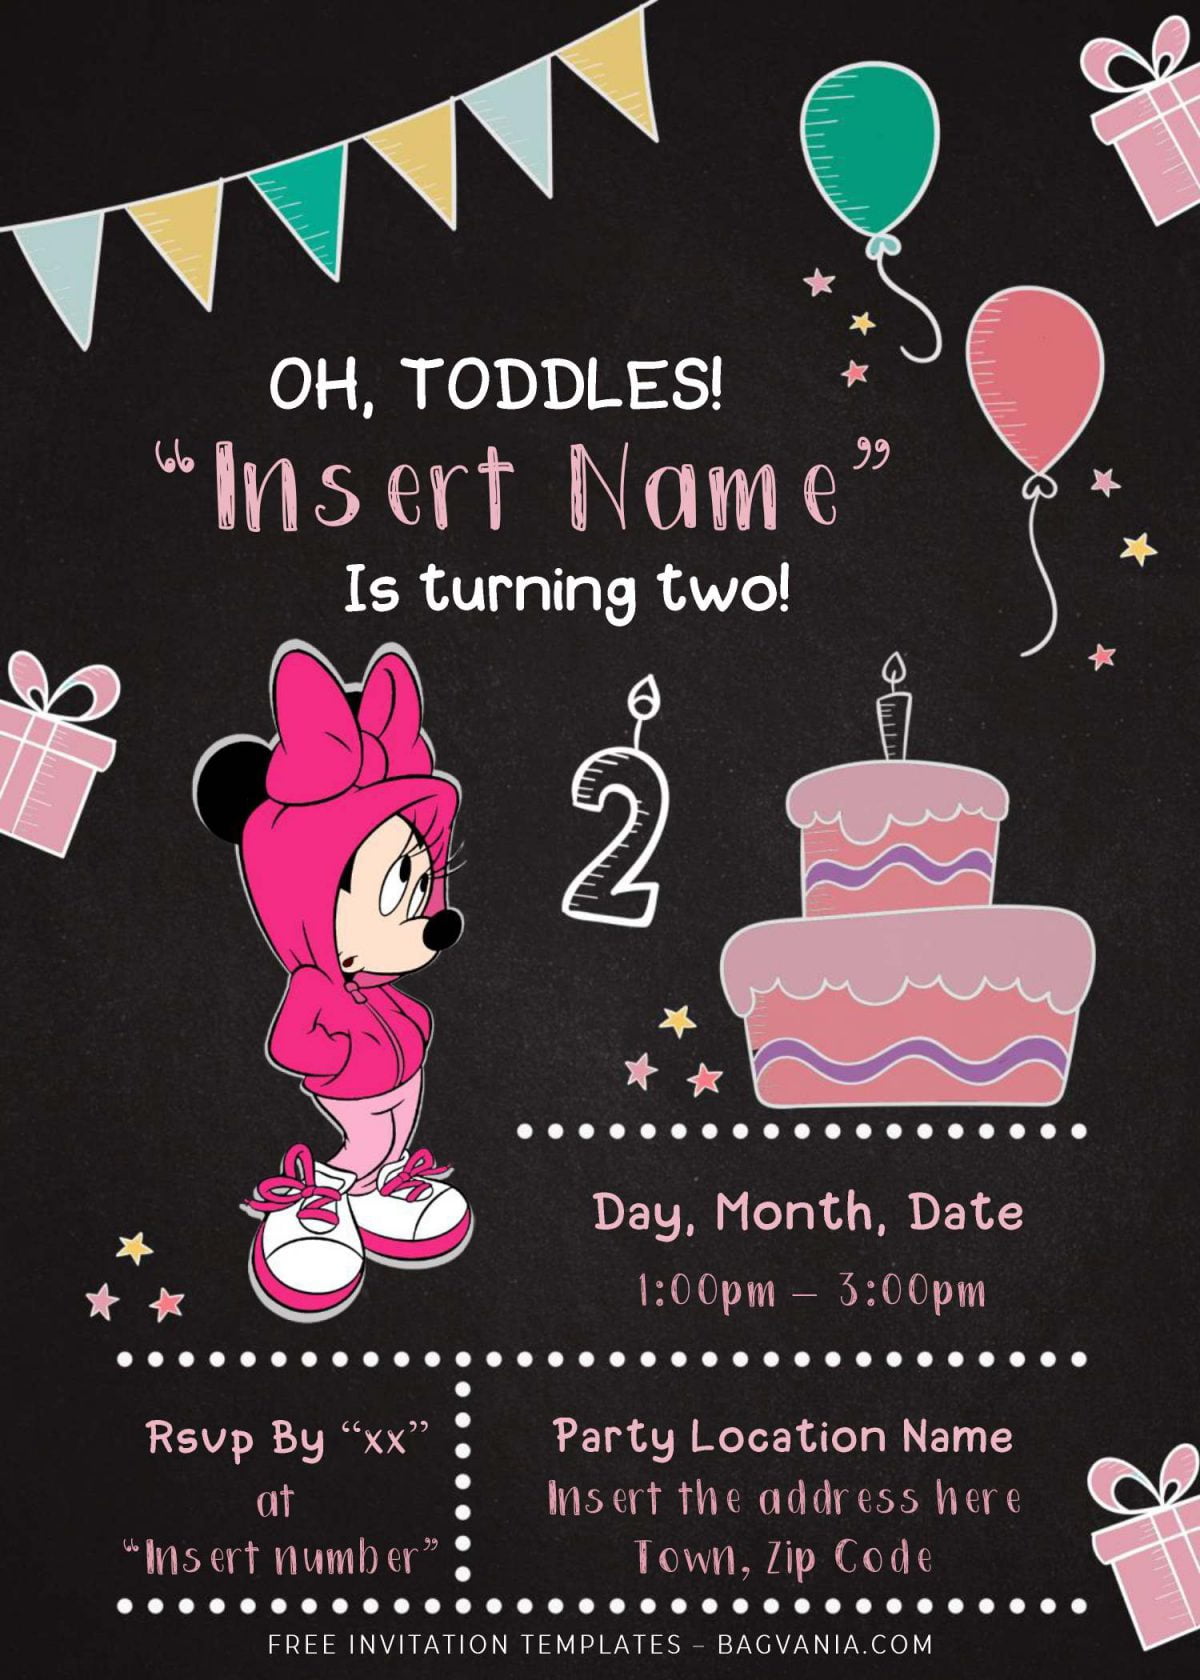 Free Minnie Mouse Chalkboard Birthday Invitation Templates For Word and has party garland and chalkboard background